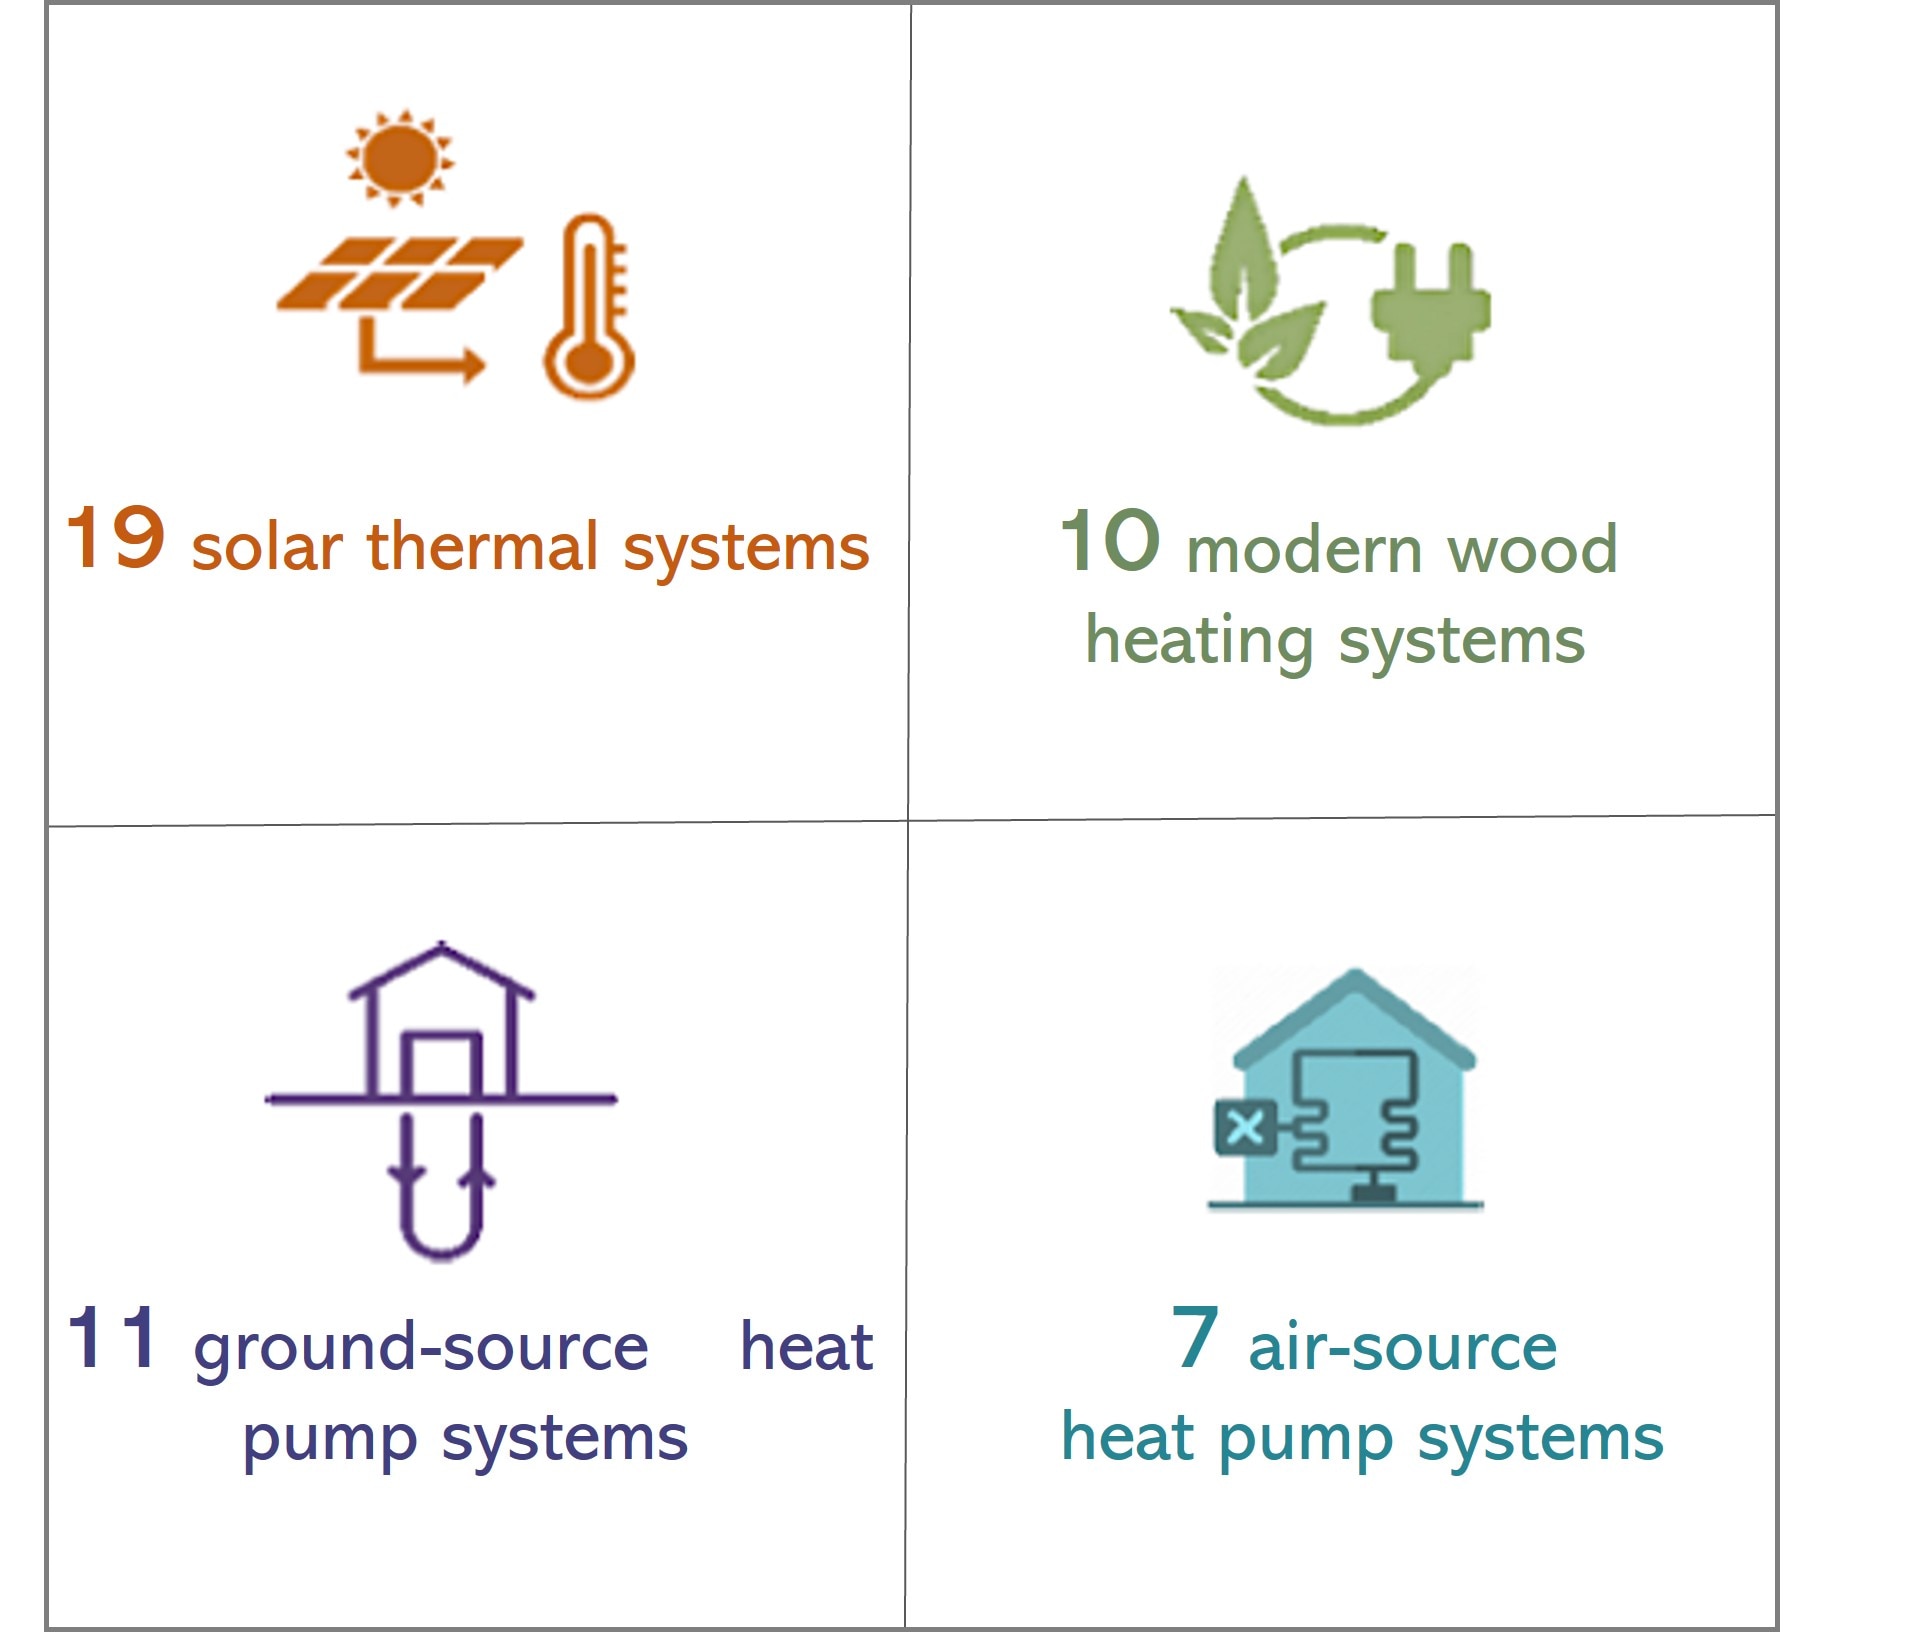 State facilities have installed 19 solar thermal systems, 10 modern wood heating systems, 11 ground-source heat pumps, and 7 air-source heat pumps